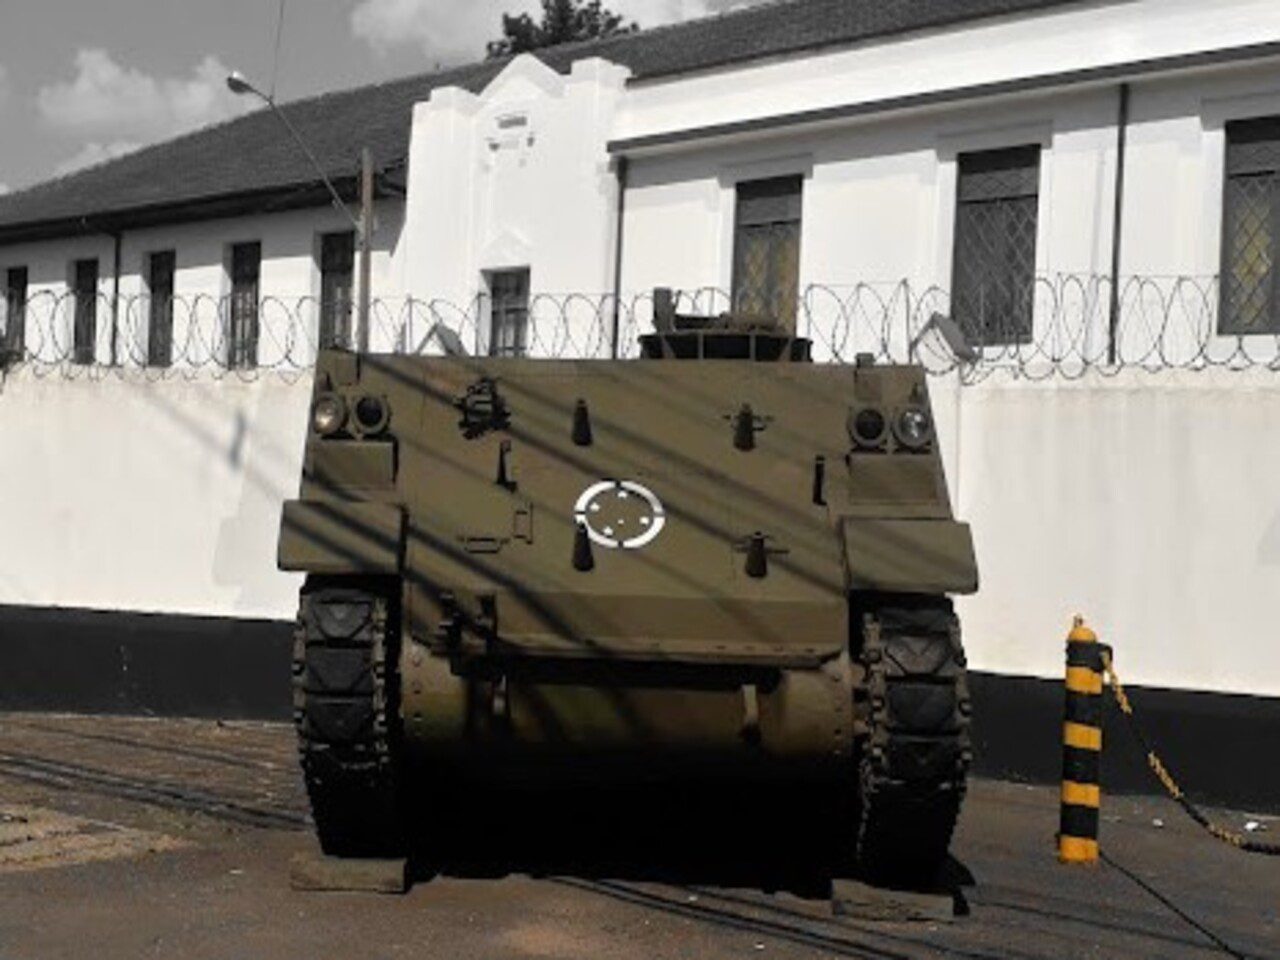 20th BIB begins revitalization of the M-59 "Bernardini" armored car in Curitiba Curitiba (PR) - Located in front of the 20th Armored Infantry Battalion "Battalion Sergeant Max Wolf Filho", symbolizing the specialty of this military organization, the M-59 "Bernardini" Armored Carrier was removed to be revitalized, and when ready, will return to its prominent position. The M-59 model arrived in Brazil in 1960, through the Brazil - United States Military Agreement, being completely innovative in the ranks of the Brazilian Army, because until then all troop transportation, in armored vehicles, was based on the models received after the war. Its original concept contemplated, although limited, an amphibious operation capacity, and as a technological differential it had the periscope system and infrared device for driving at night or with the hatches closed. For its self-defense it was equipped with a hydraulic turret, armed with a Browning .50 caliber automatic machine gun. It also had a transport capacity for 10 soldiers. The last units were deactivated from the ranks of the Brazilian Army in 1982, replaced by the M-113. Source: 20th Armored Infantry Battalion